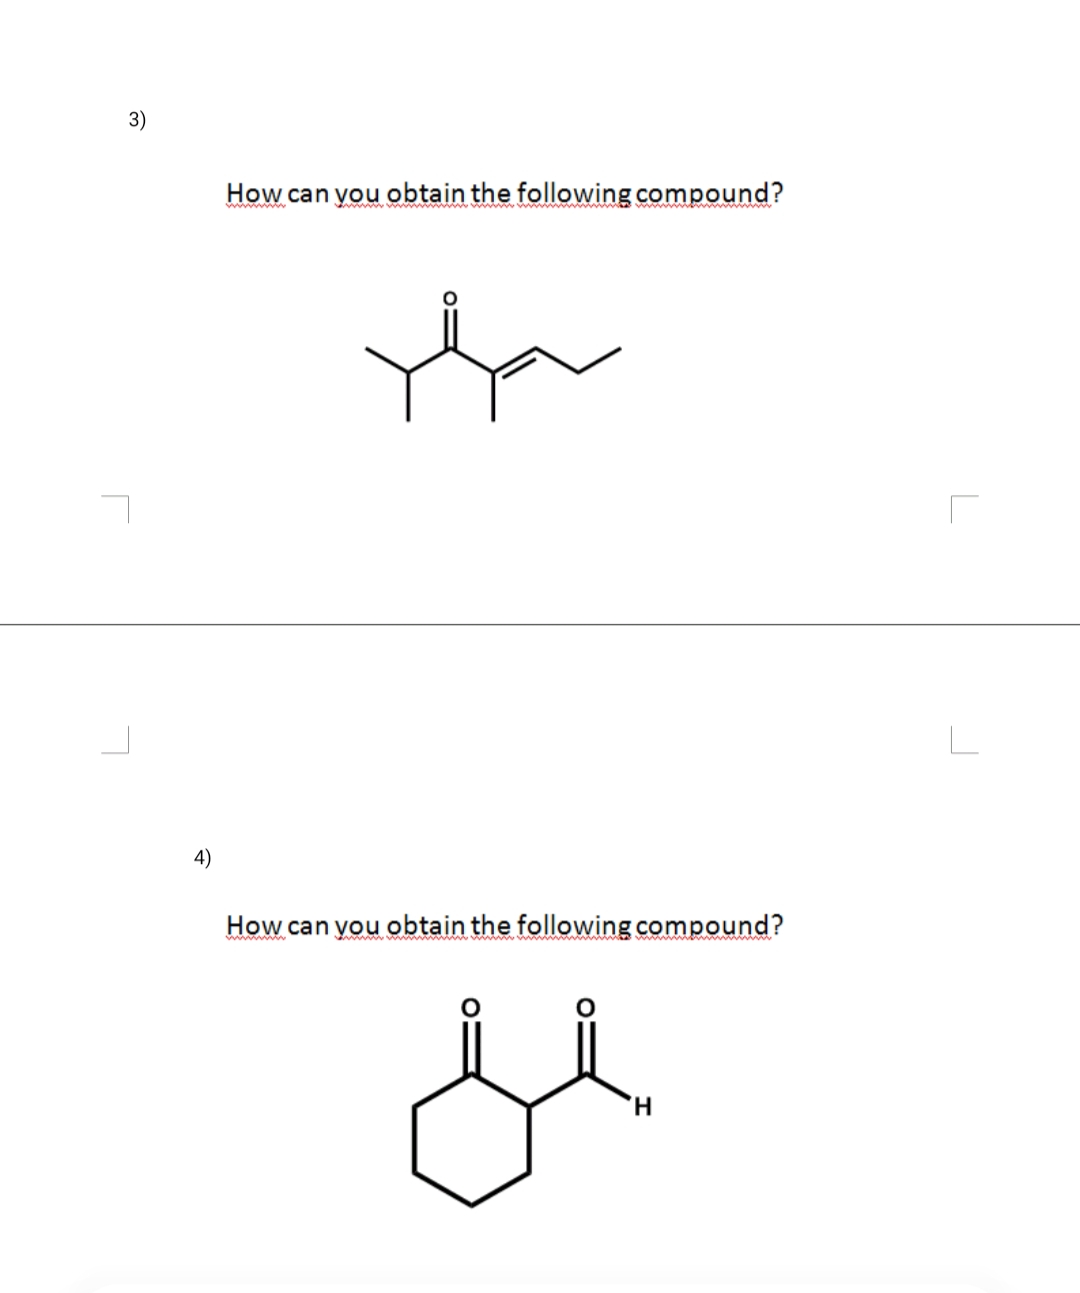 3)
4)
How can you obtain the following compound?
Ho
How can you obtain the following compound?
je
H
L